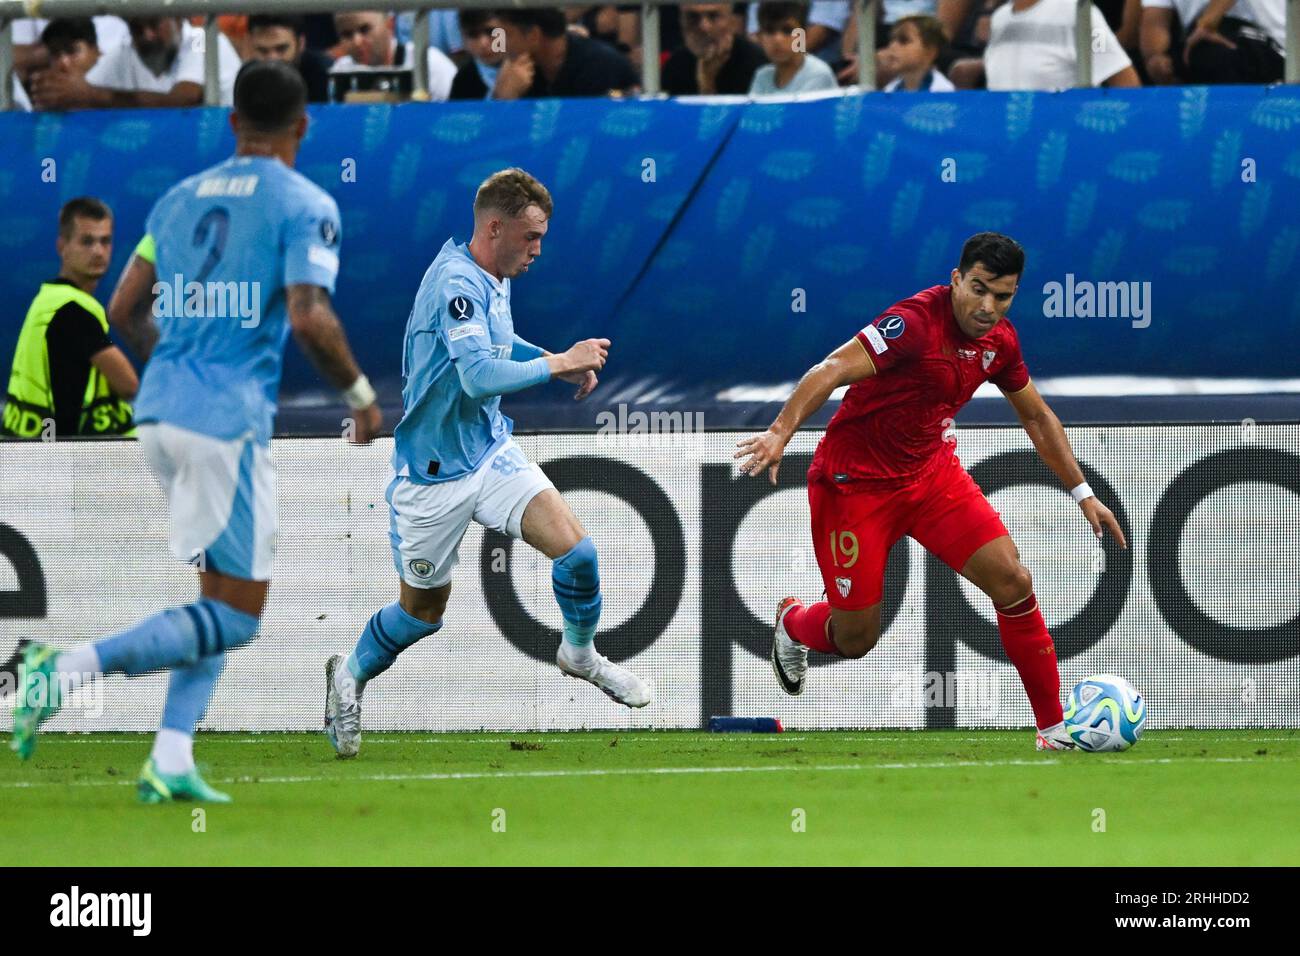 Piraeus, Greece. 16 August, 2023: Marcos Acuna of Sevilla competes against Cole Palmer of Manchester City during the UEFA Super Cup 2023 match between Manchester City FC and Sevilla FC at Georgios Karaiskakis Stadium in Piraeus, Greece. August 16, 2023. (Photo by Nikola Krstic/Alamy) Stock Photo